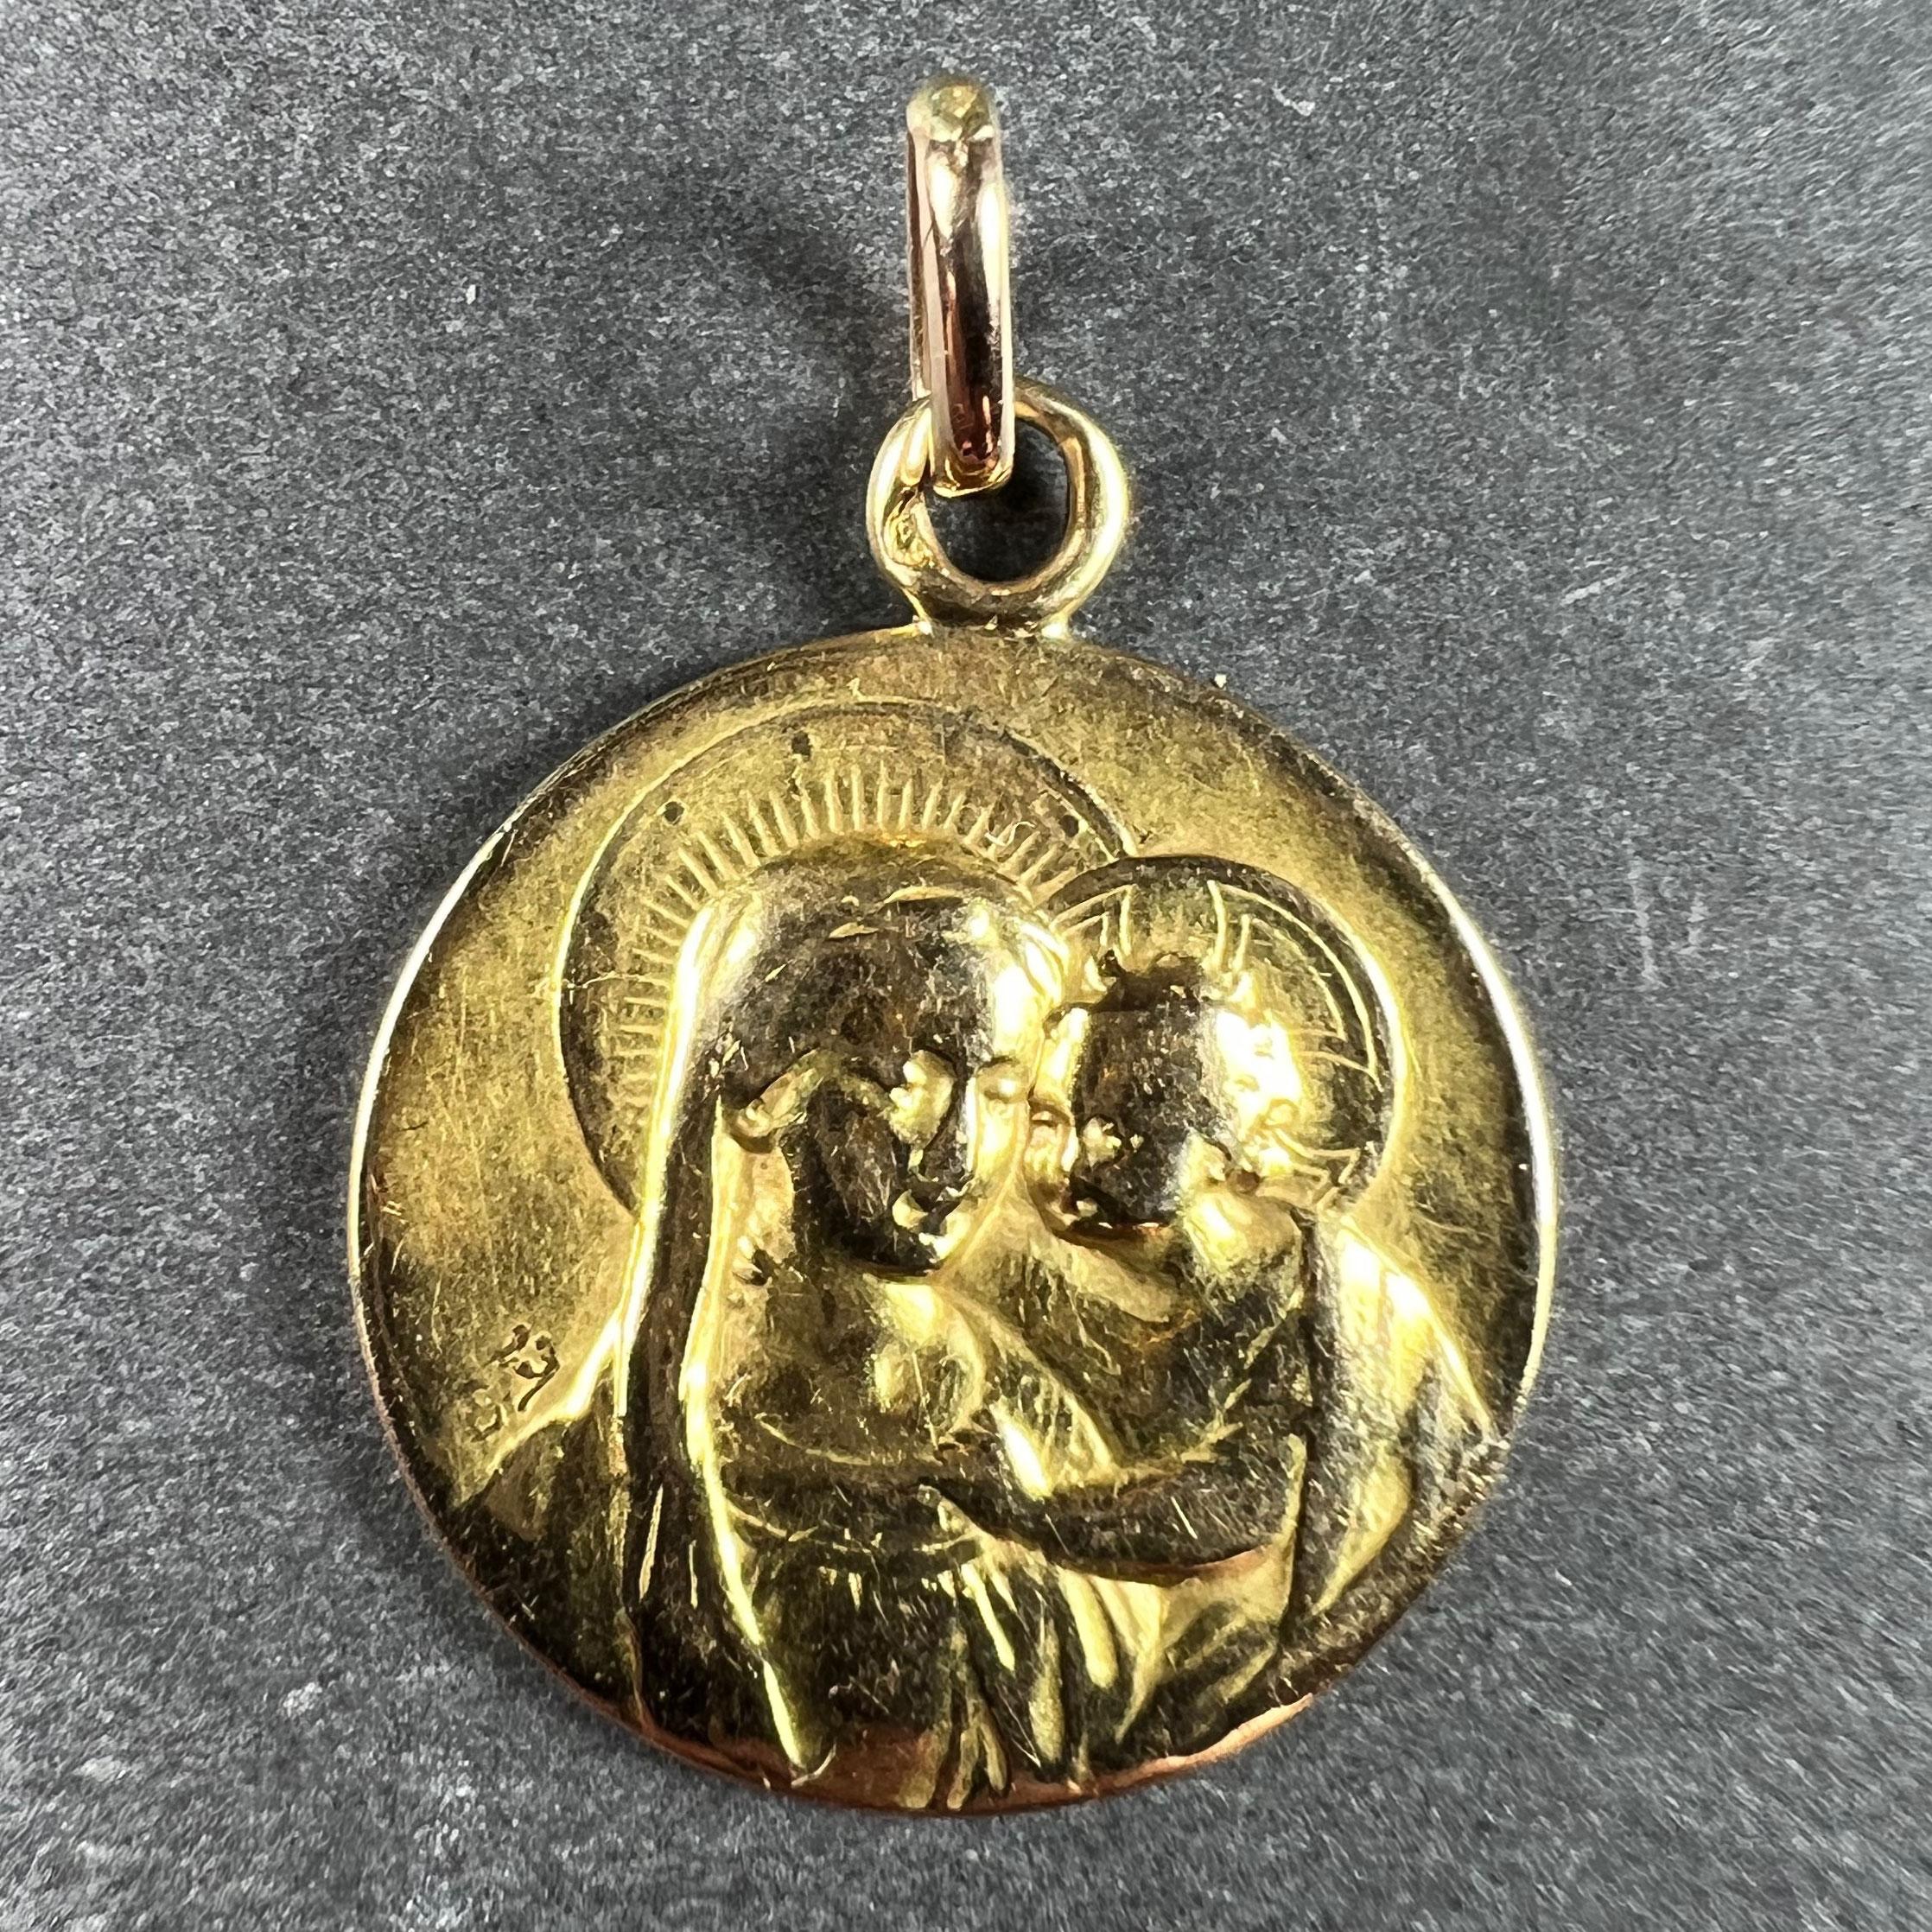 A French 18 karat (18K) yellow gold charm pendant designed as a medal depicting the Madonna and Child. Stamped with the eagle’s head mark for 18 karat gold and French manufacture. Engraved to the reverse with the monogram EJ and the date 8th August